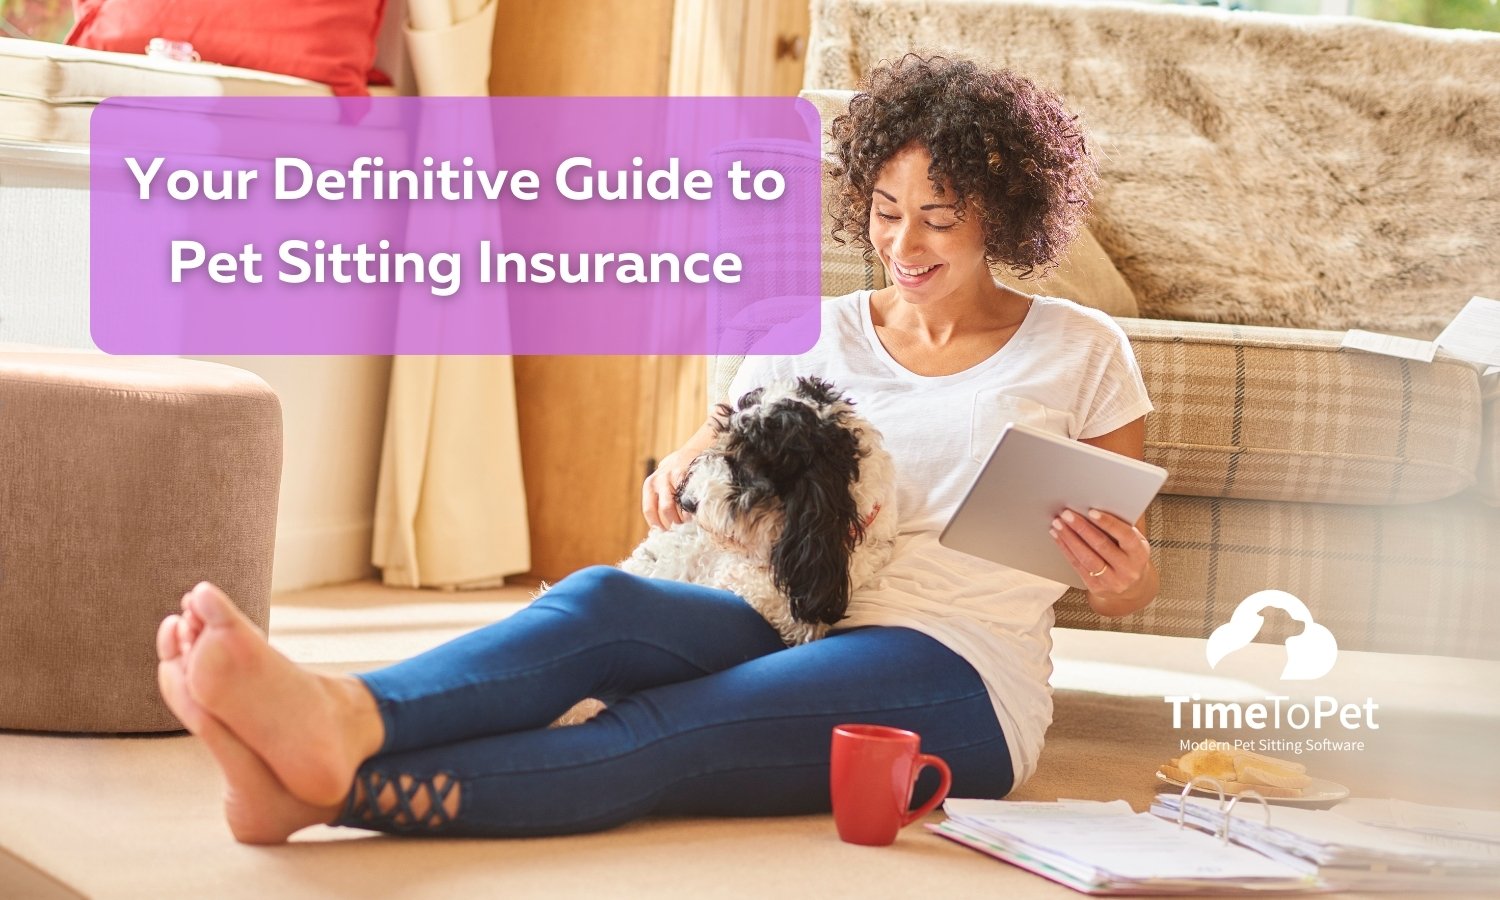 Definitive guide to pet sitting insurance image